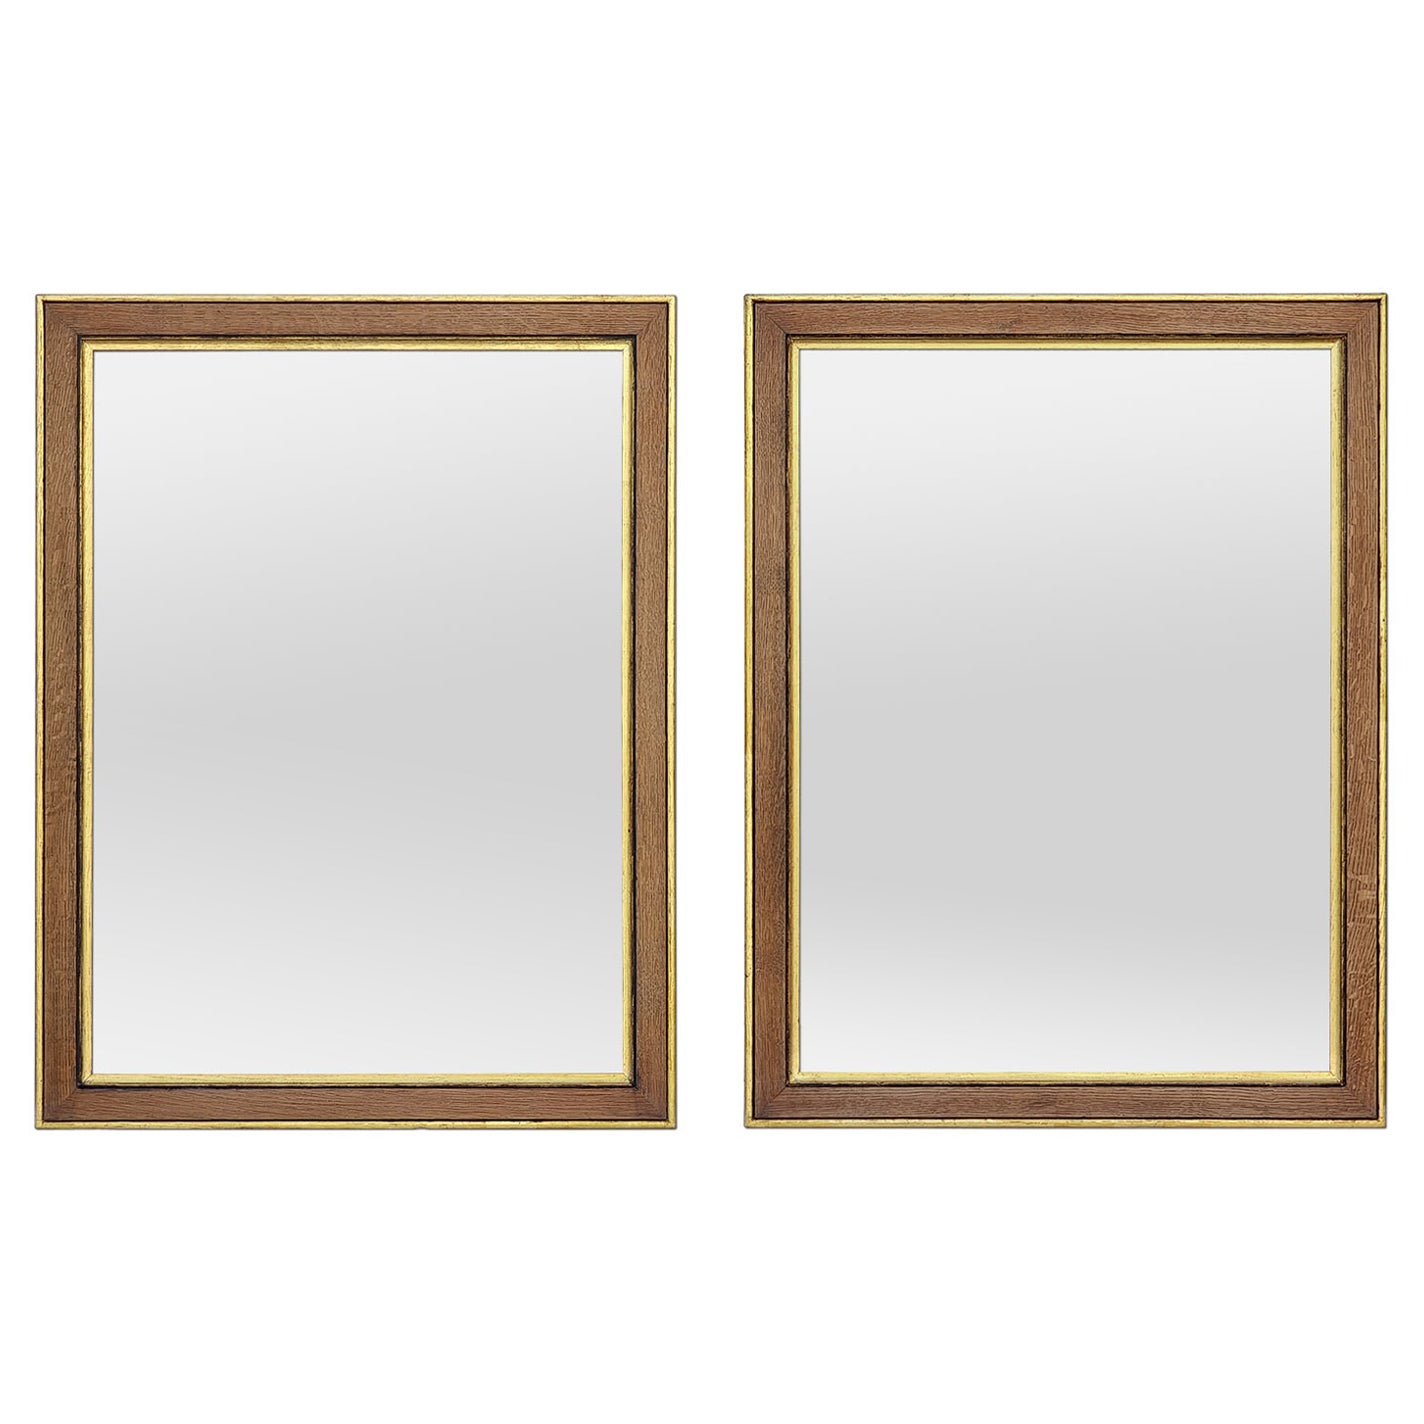 Pair of Large Oak Wood Mirrors with Gilded Fillets, circa 1890